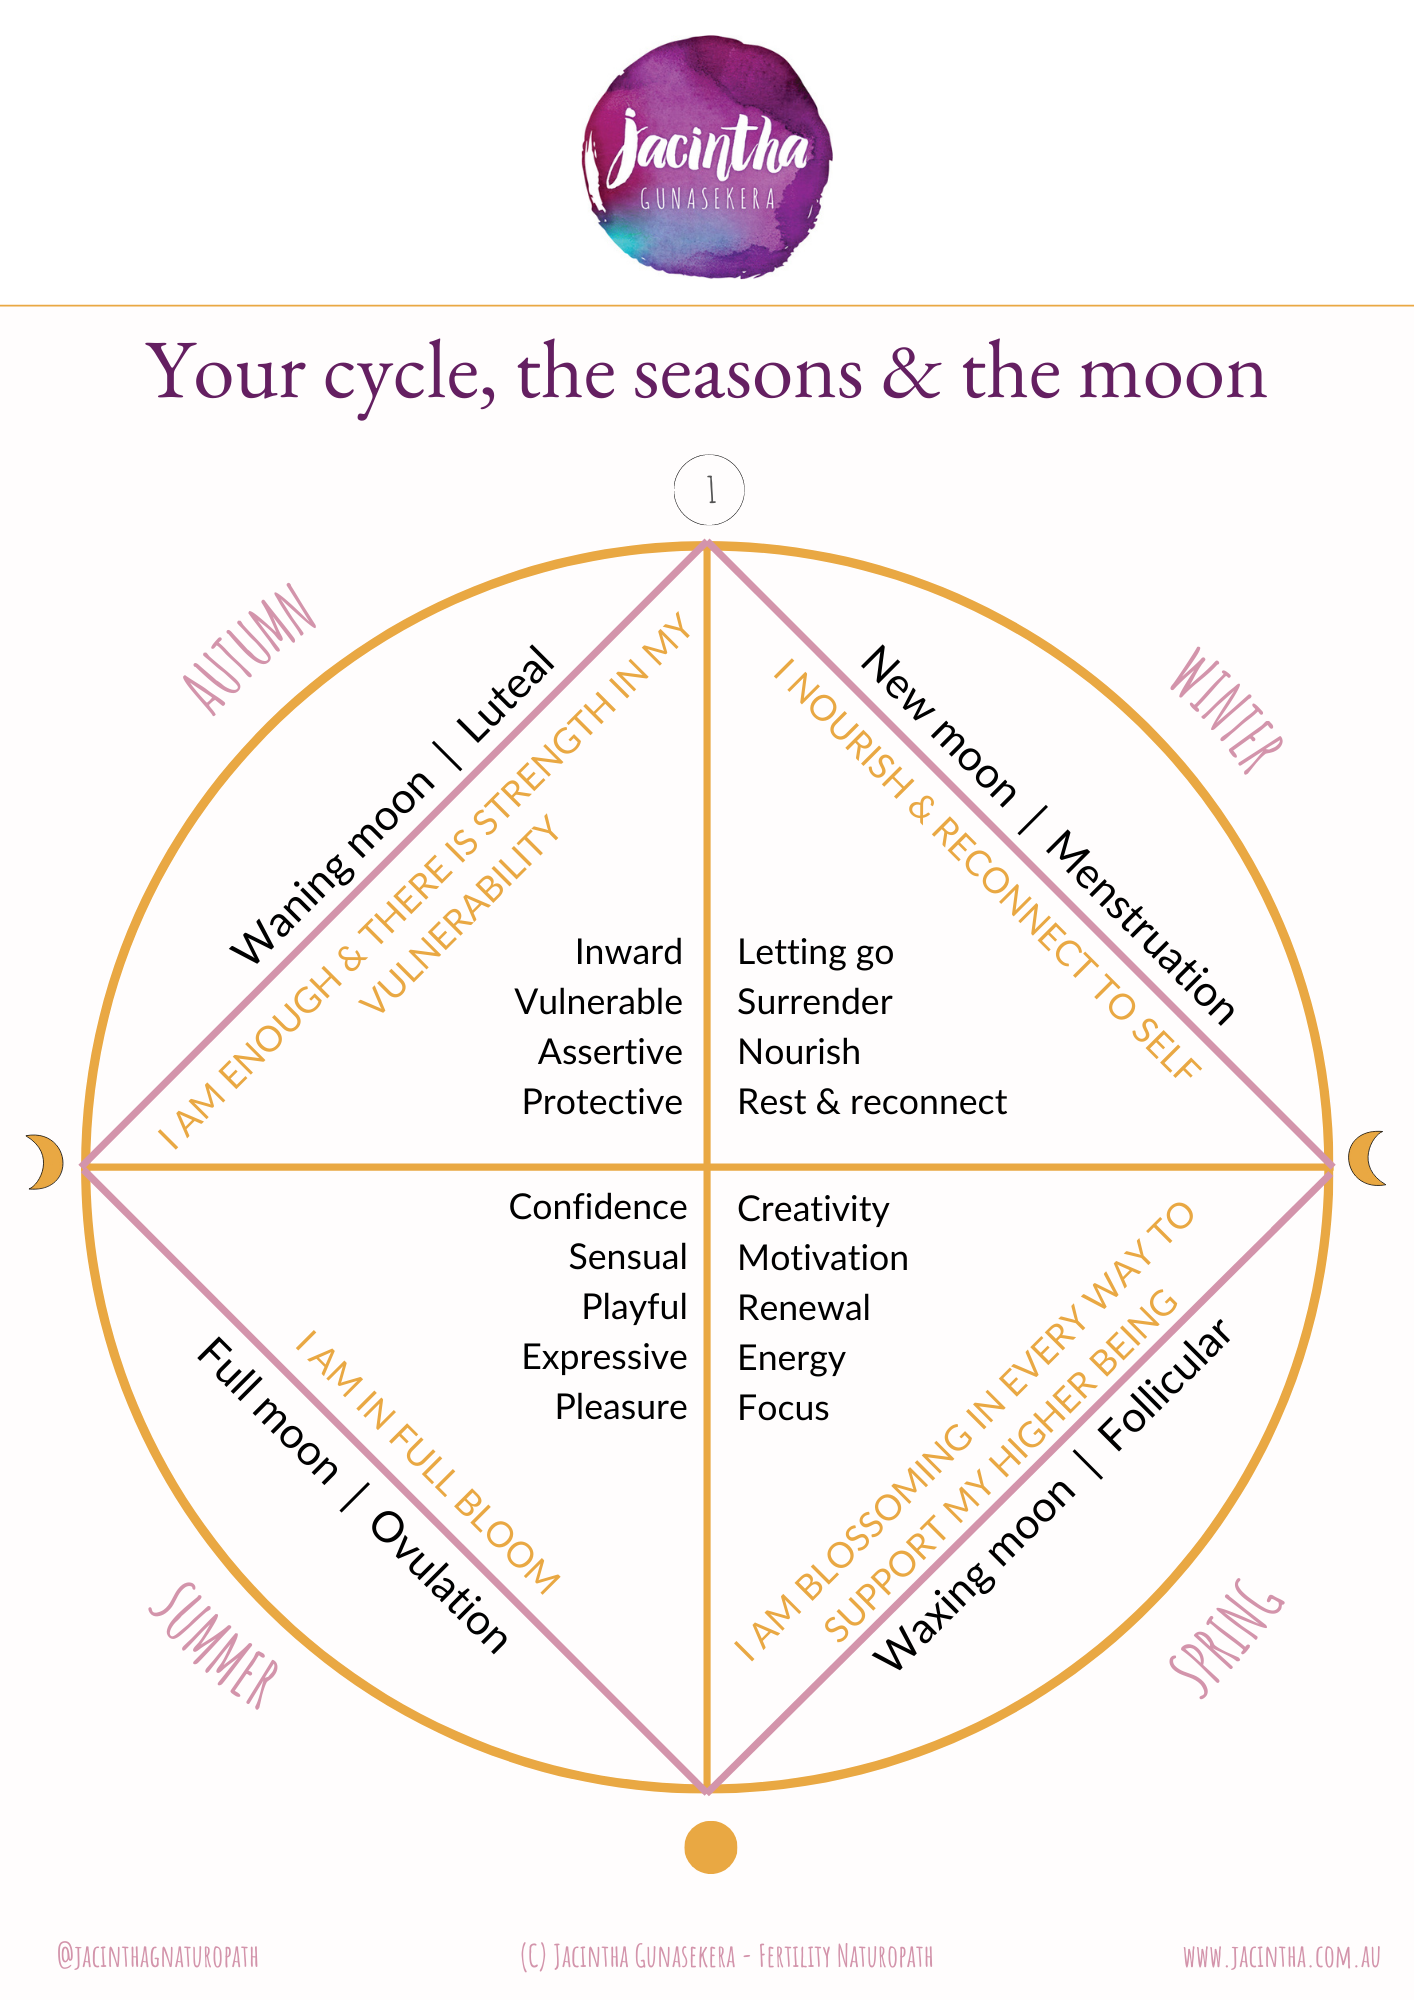 Menstrual Cycle 101 with Dr. Pari - On Our Moon